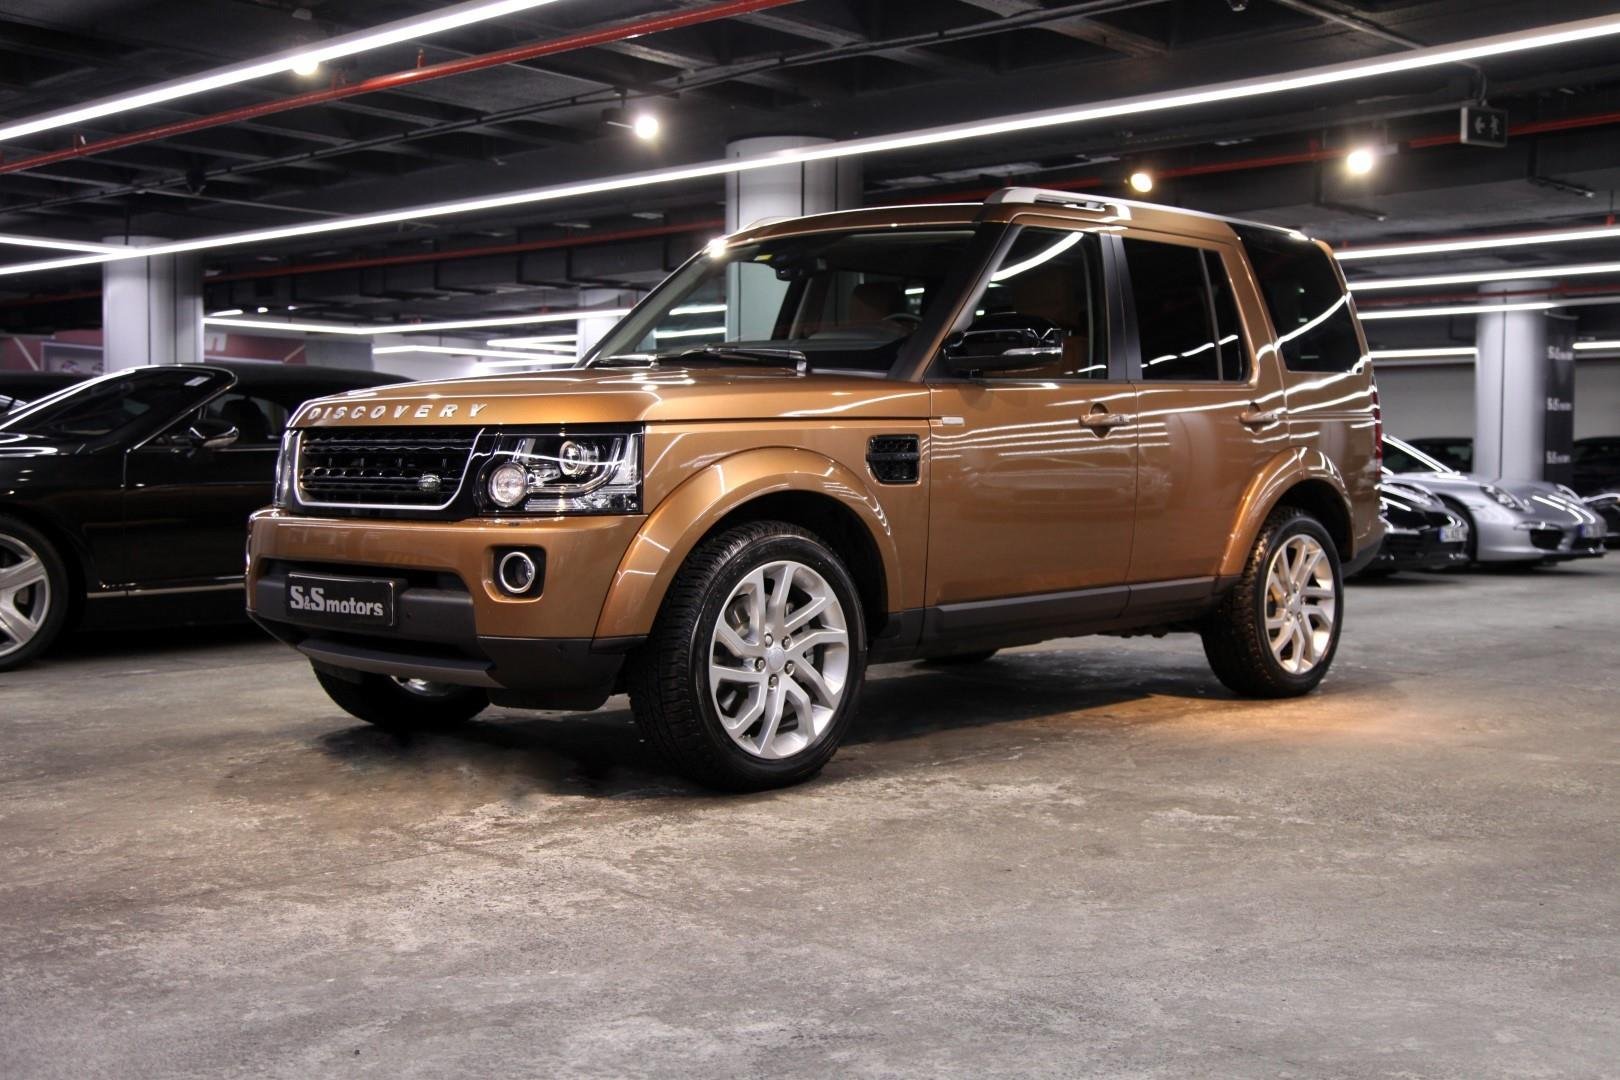 Дискавери 0. Land Rover Discovery 4. Land Rover Discovery 4 landmark. Land Rover Discovery 3 2016. Ленд Ровер Дискавери 4 2016.